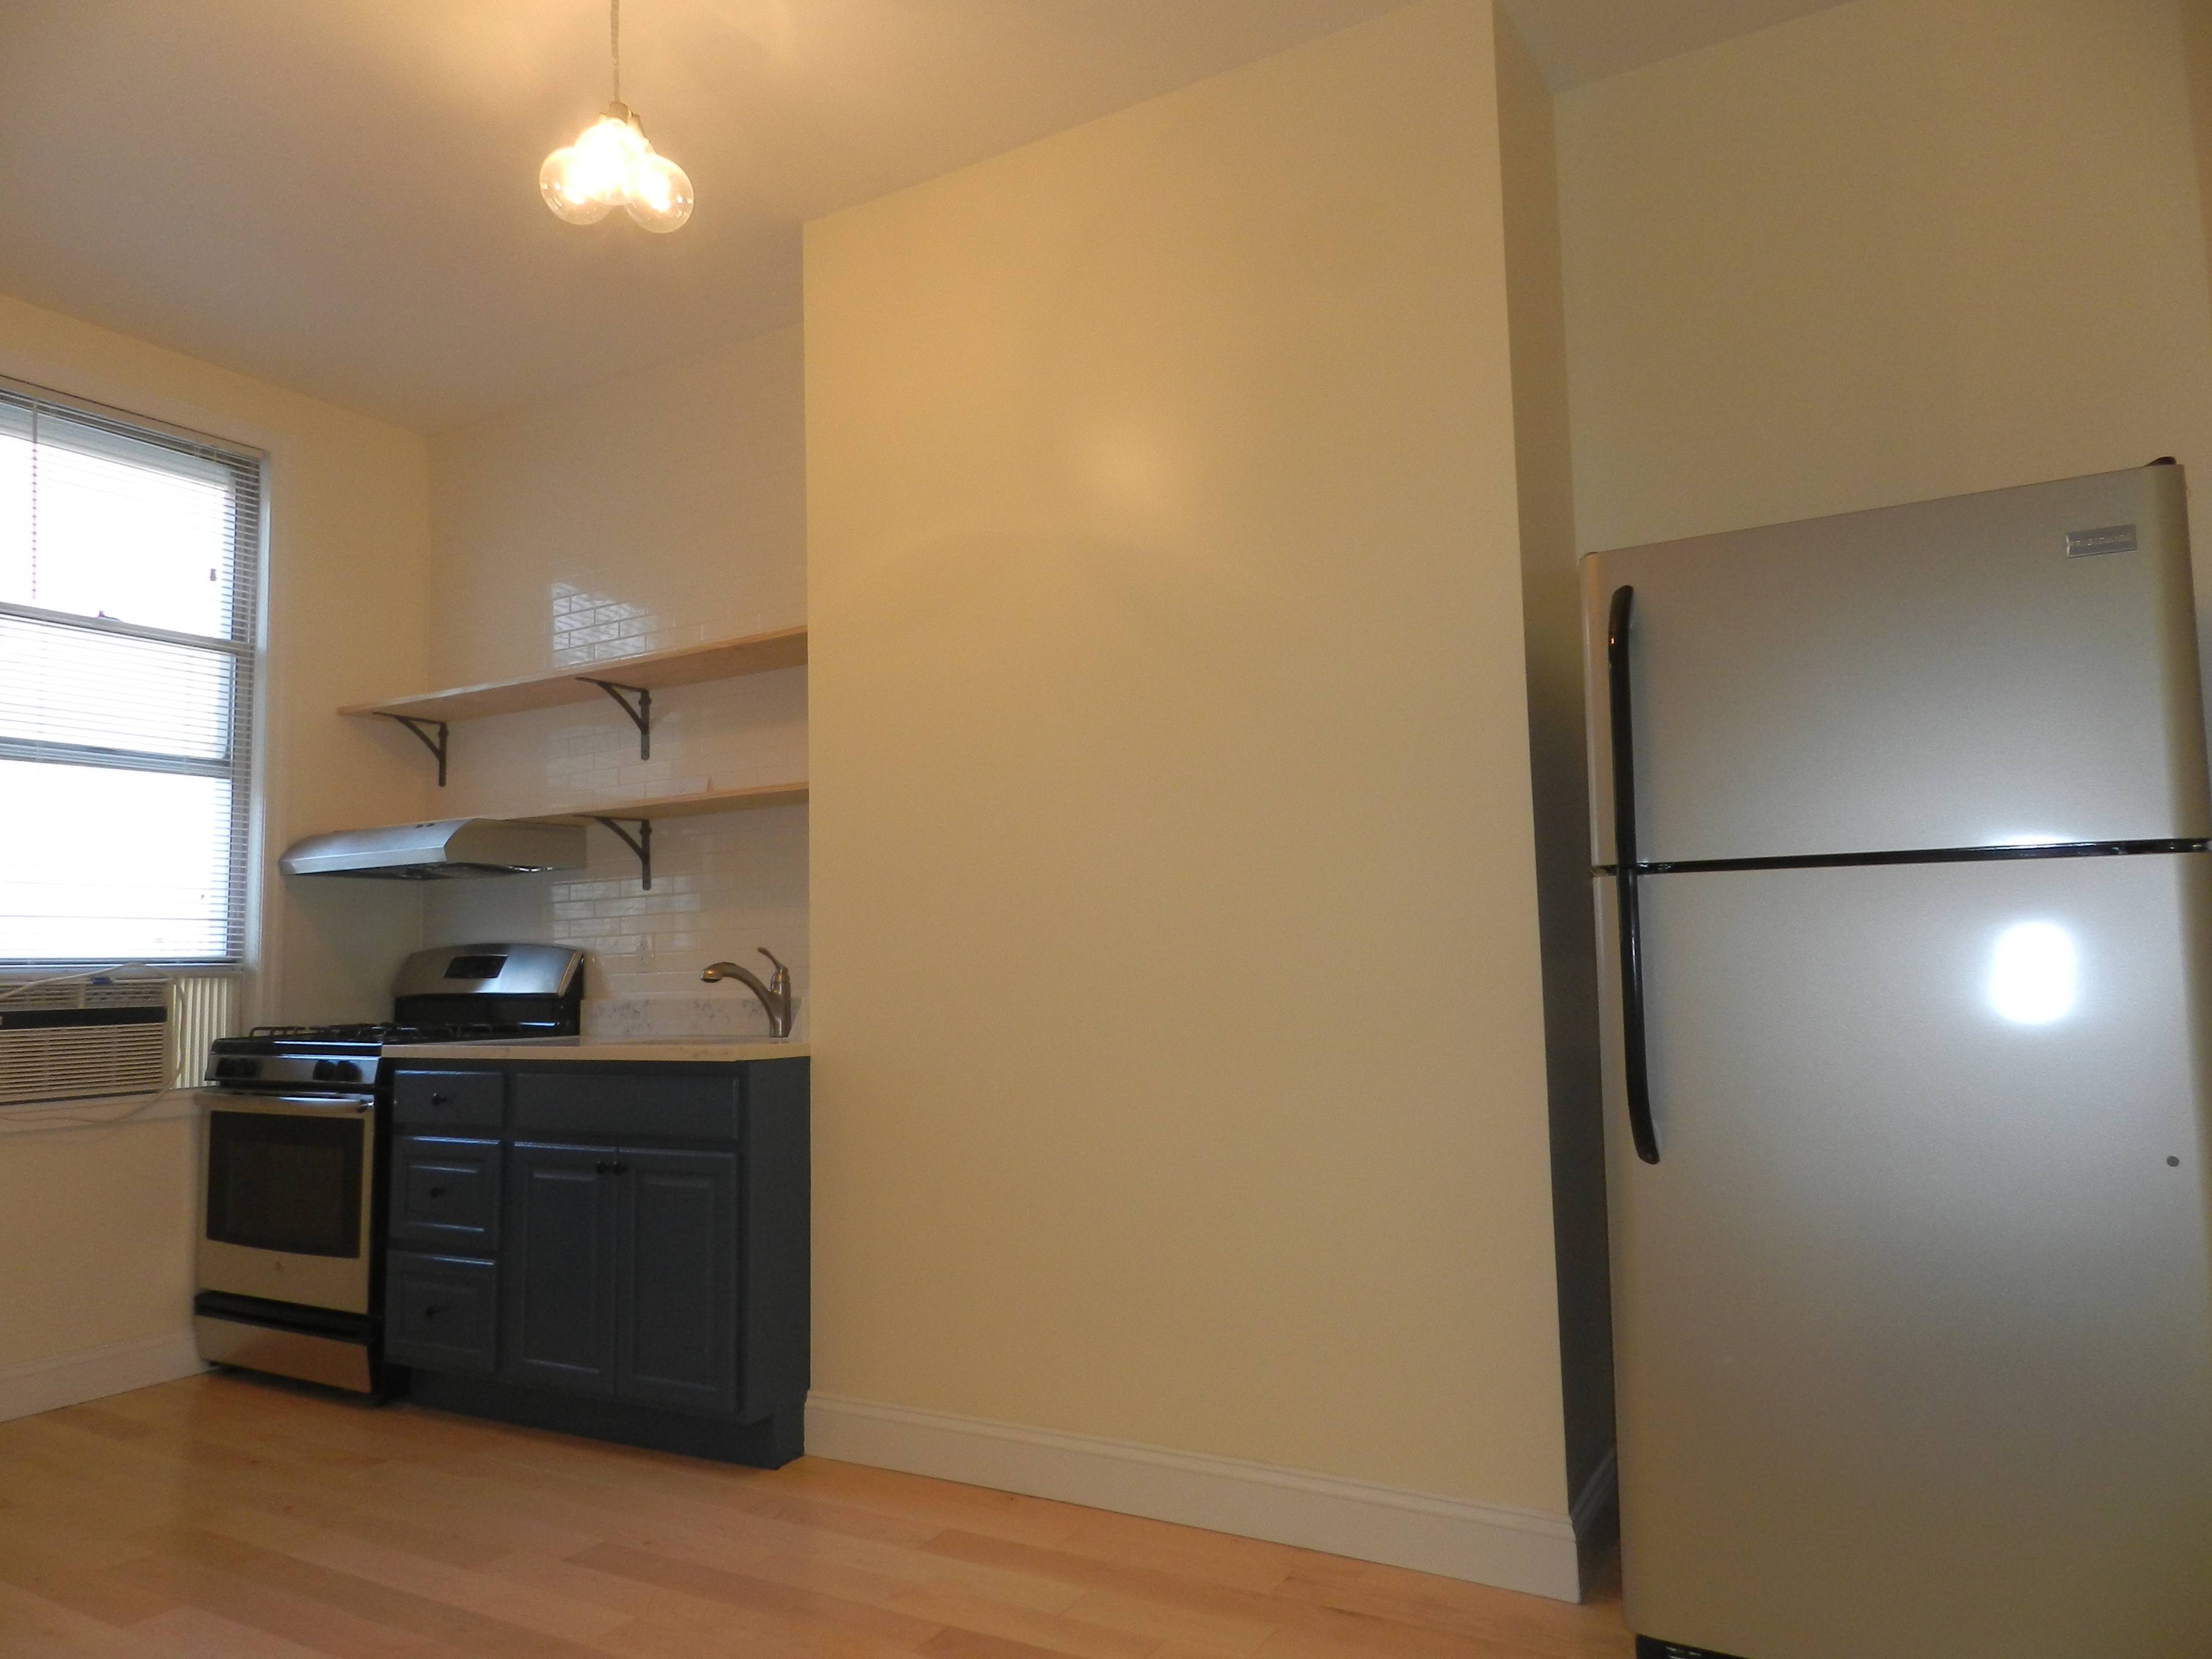 BRAND NEW Stunning 1.5 (Convertible 2) Bedrooms - Railroad Style Apartment by Grand St L Train!! - NO FEE!!!